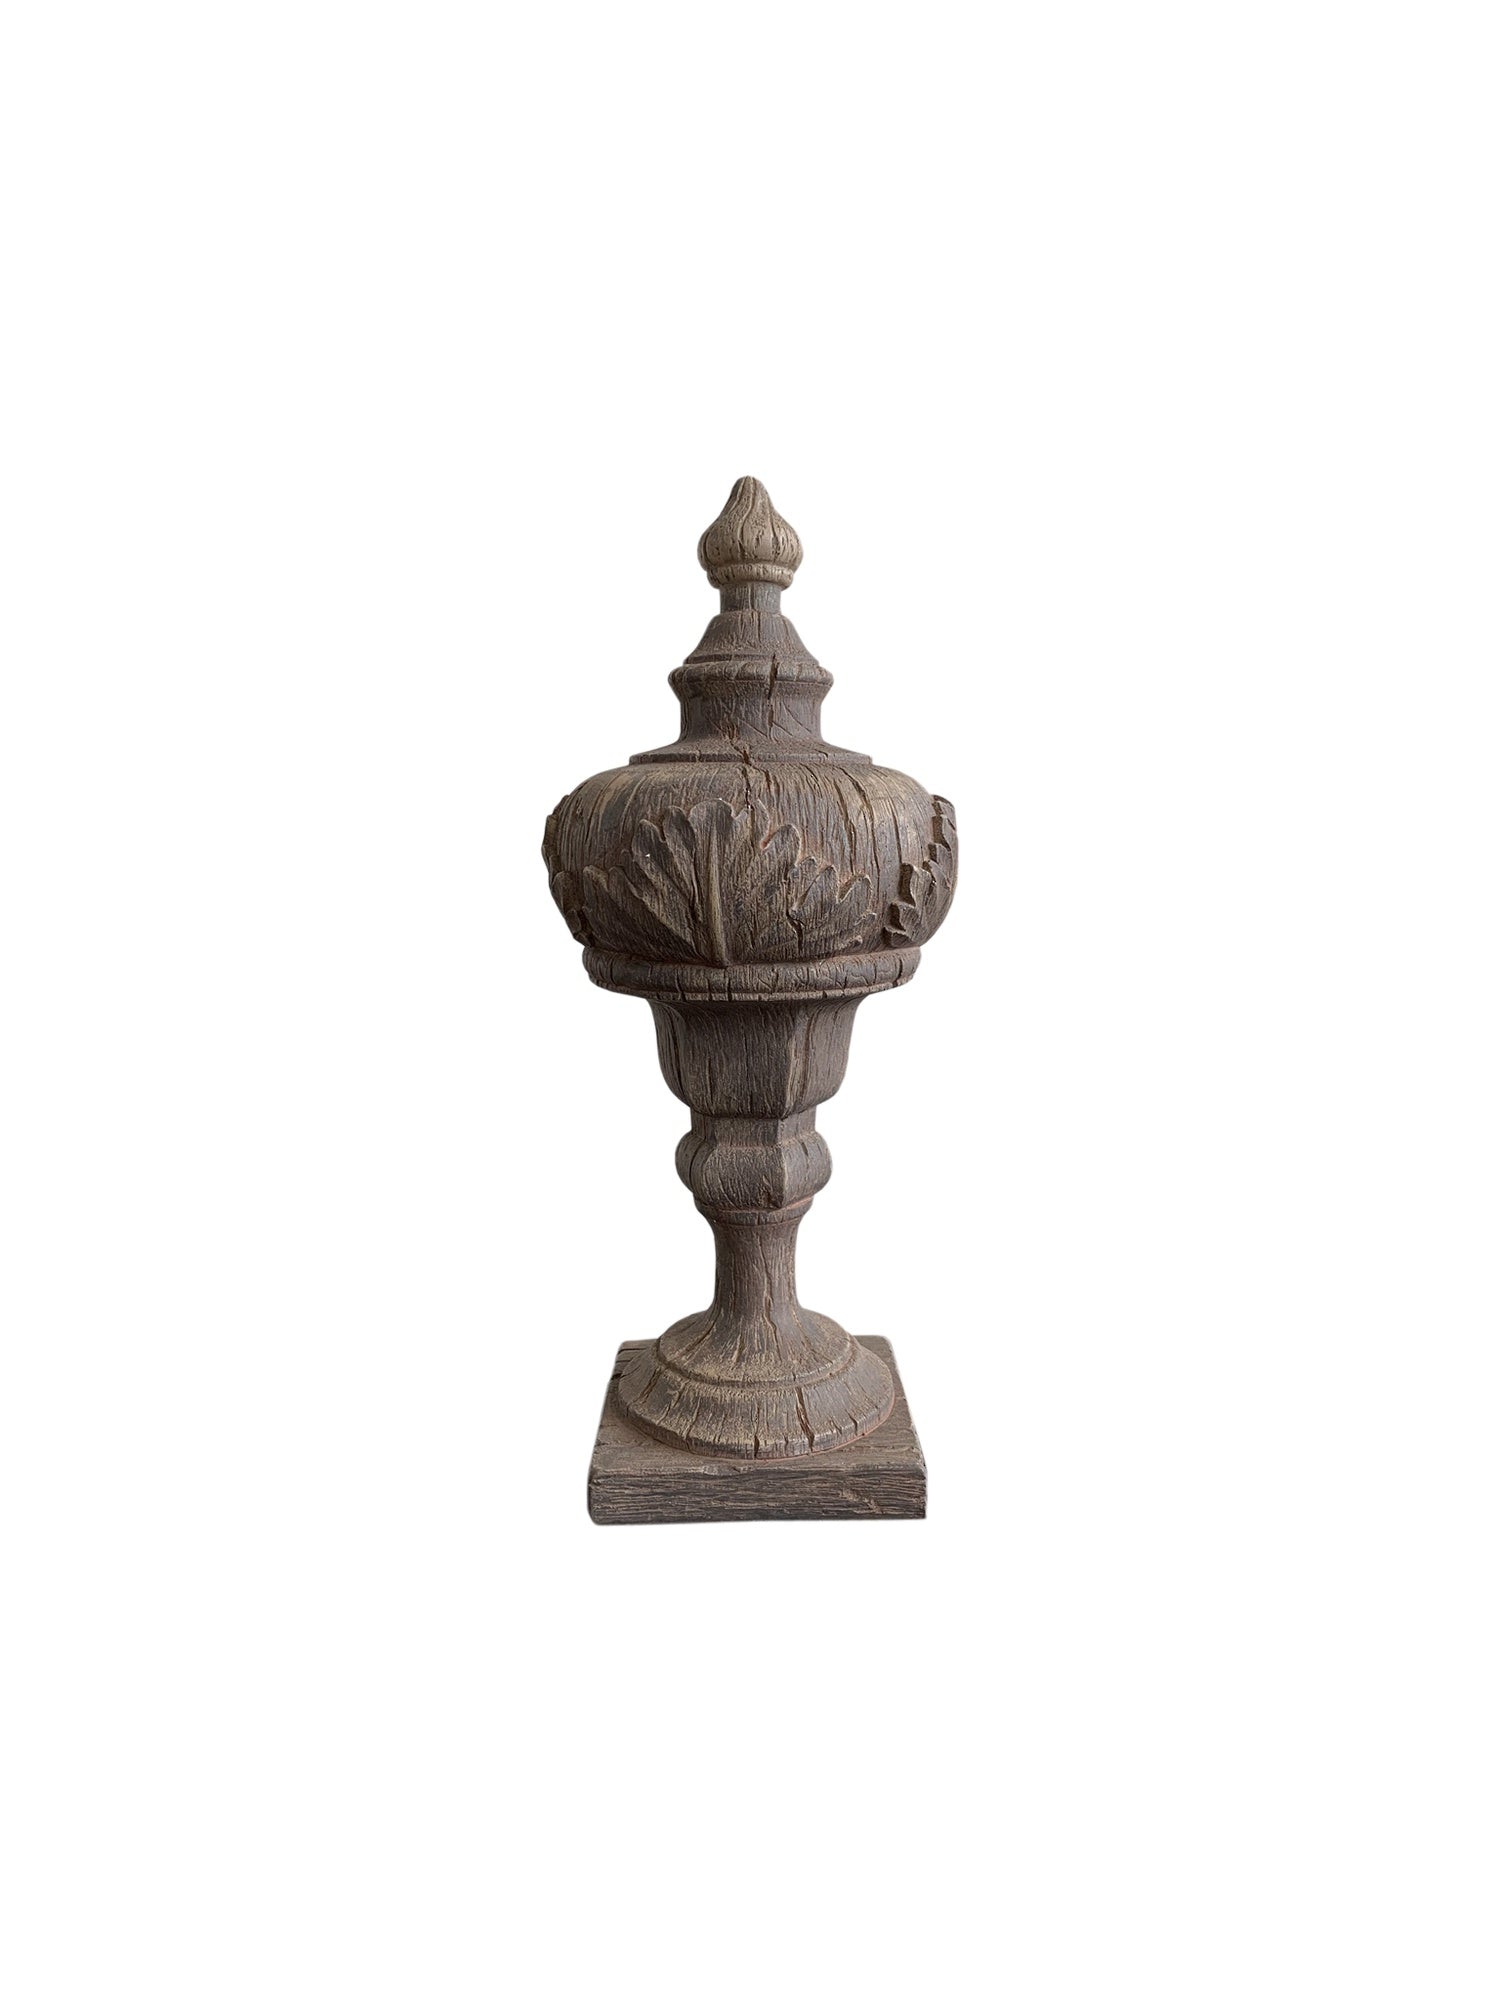 Architectural Finial - Brown